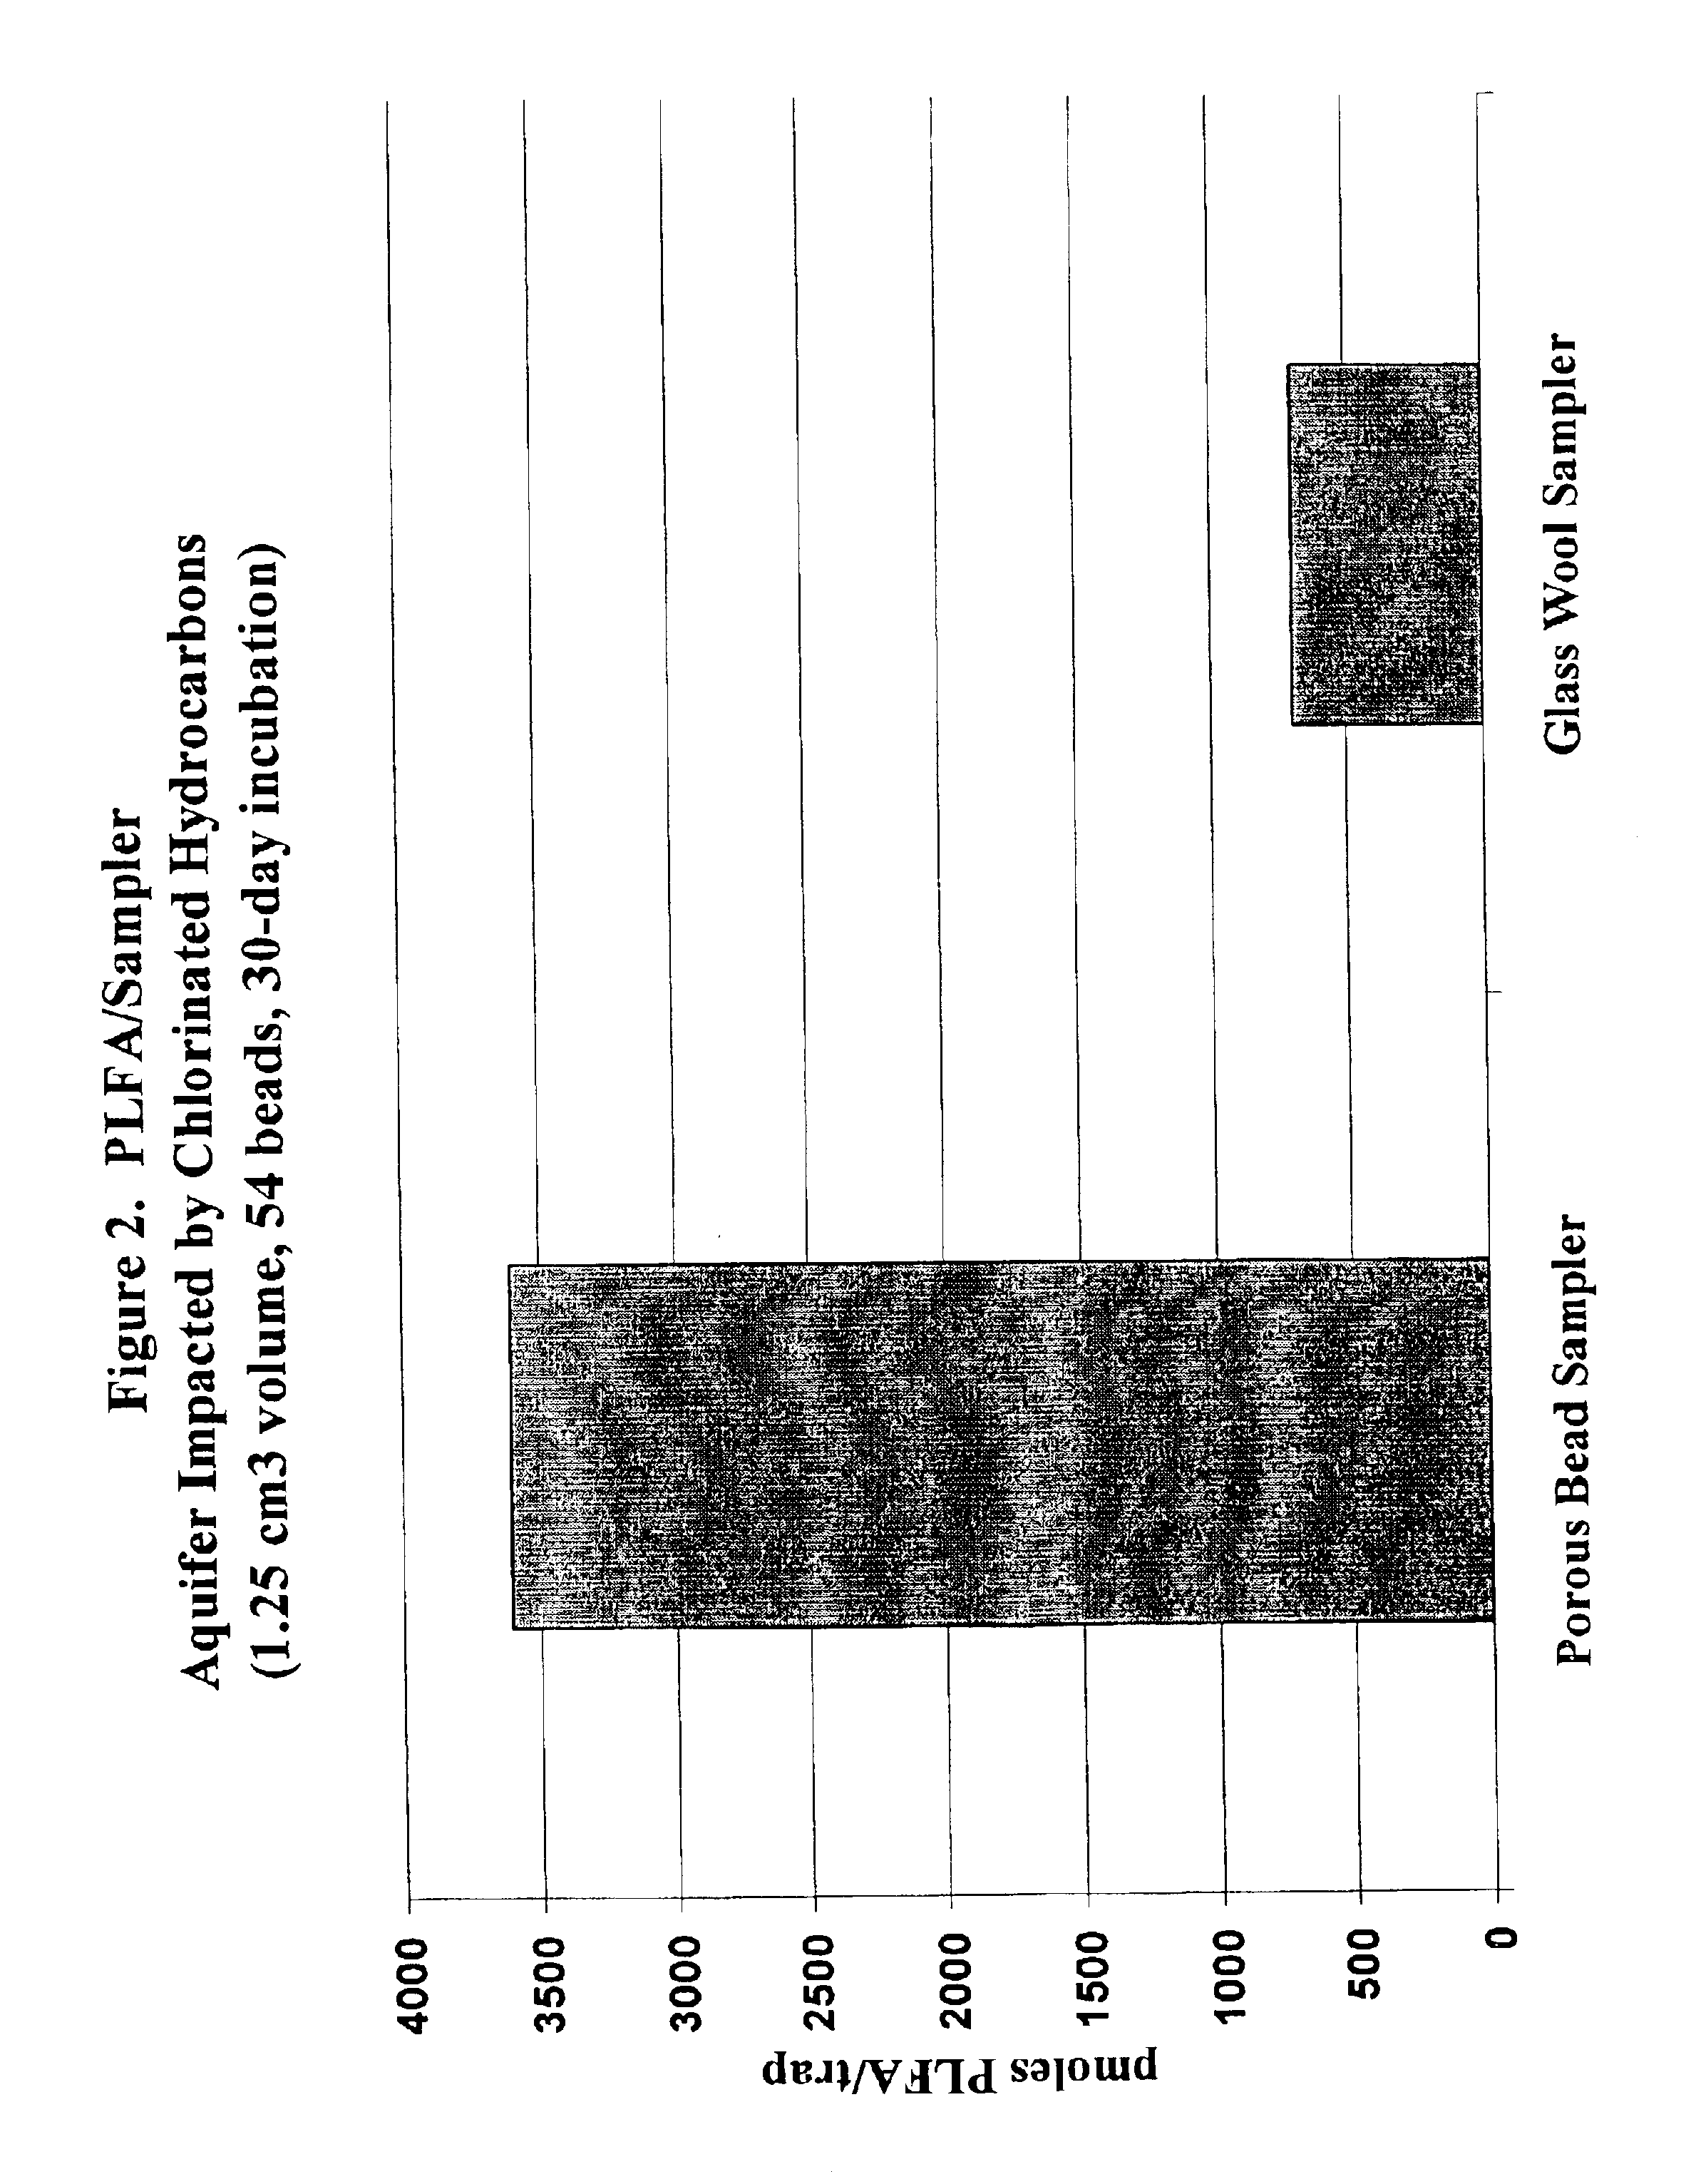 Methods for forming microcultures within porous media